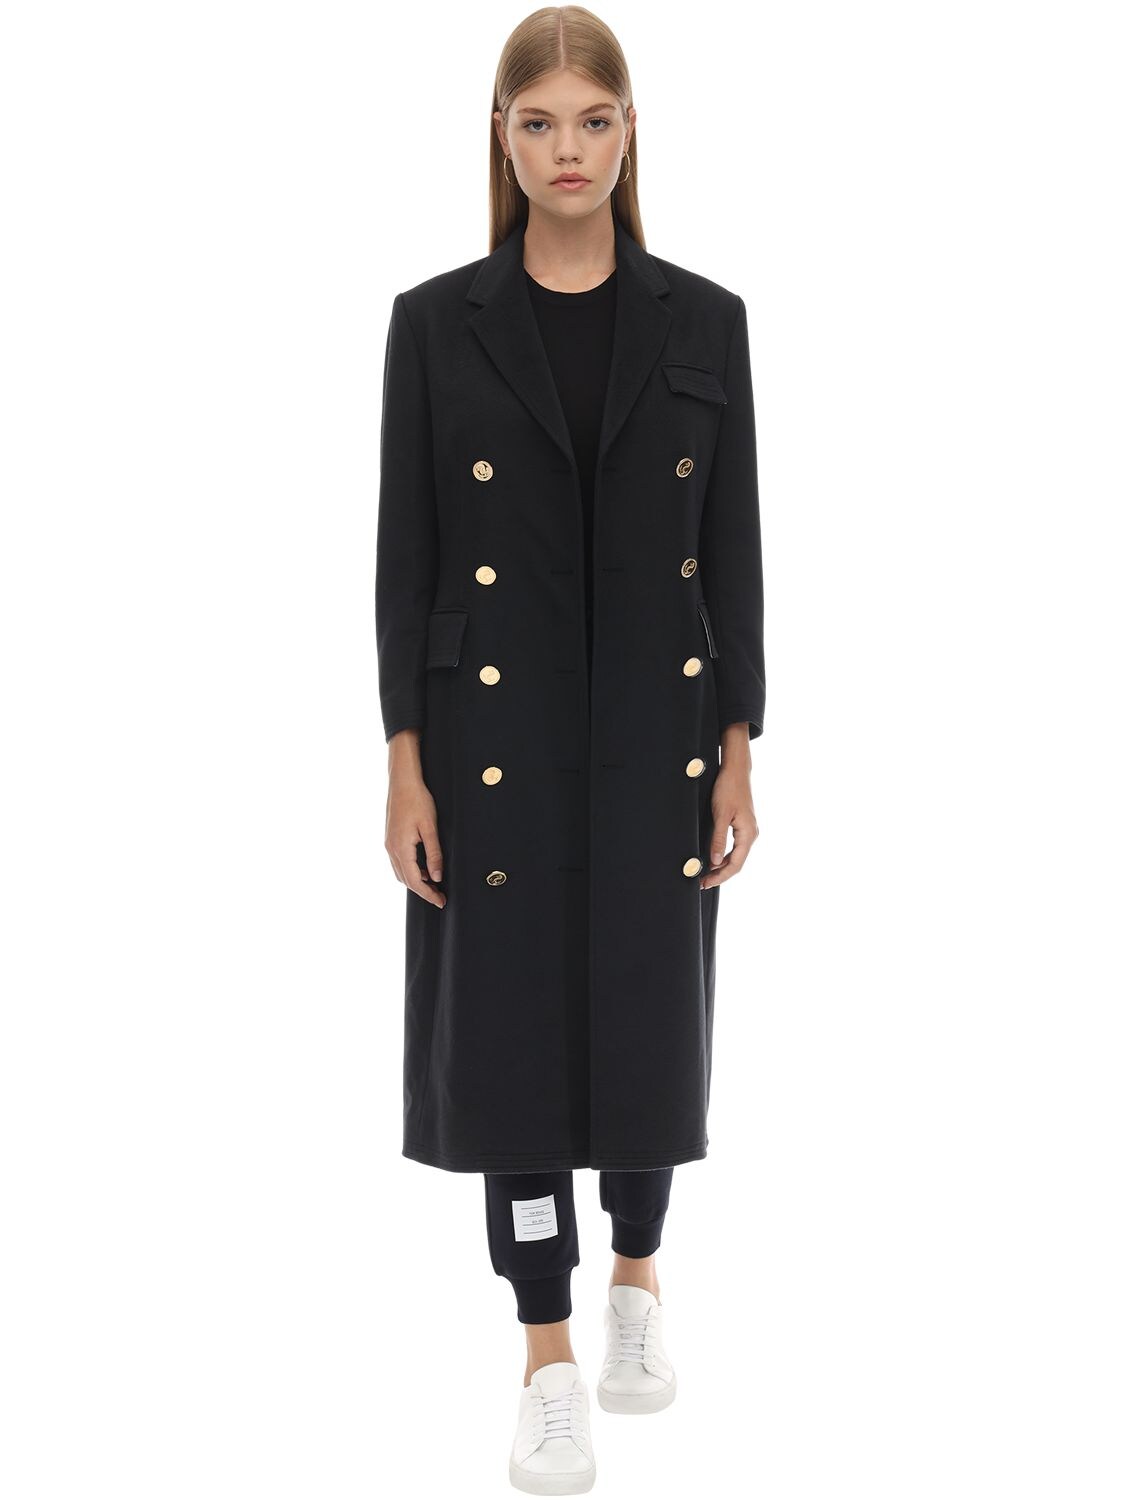 THOM BROWNE LONG DOUBLE BREAST CASHMERE COAT,70I515002-NDE10